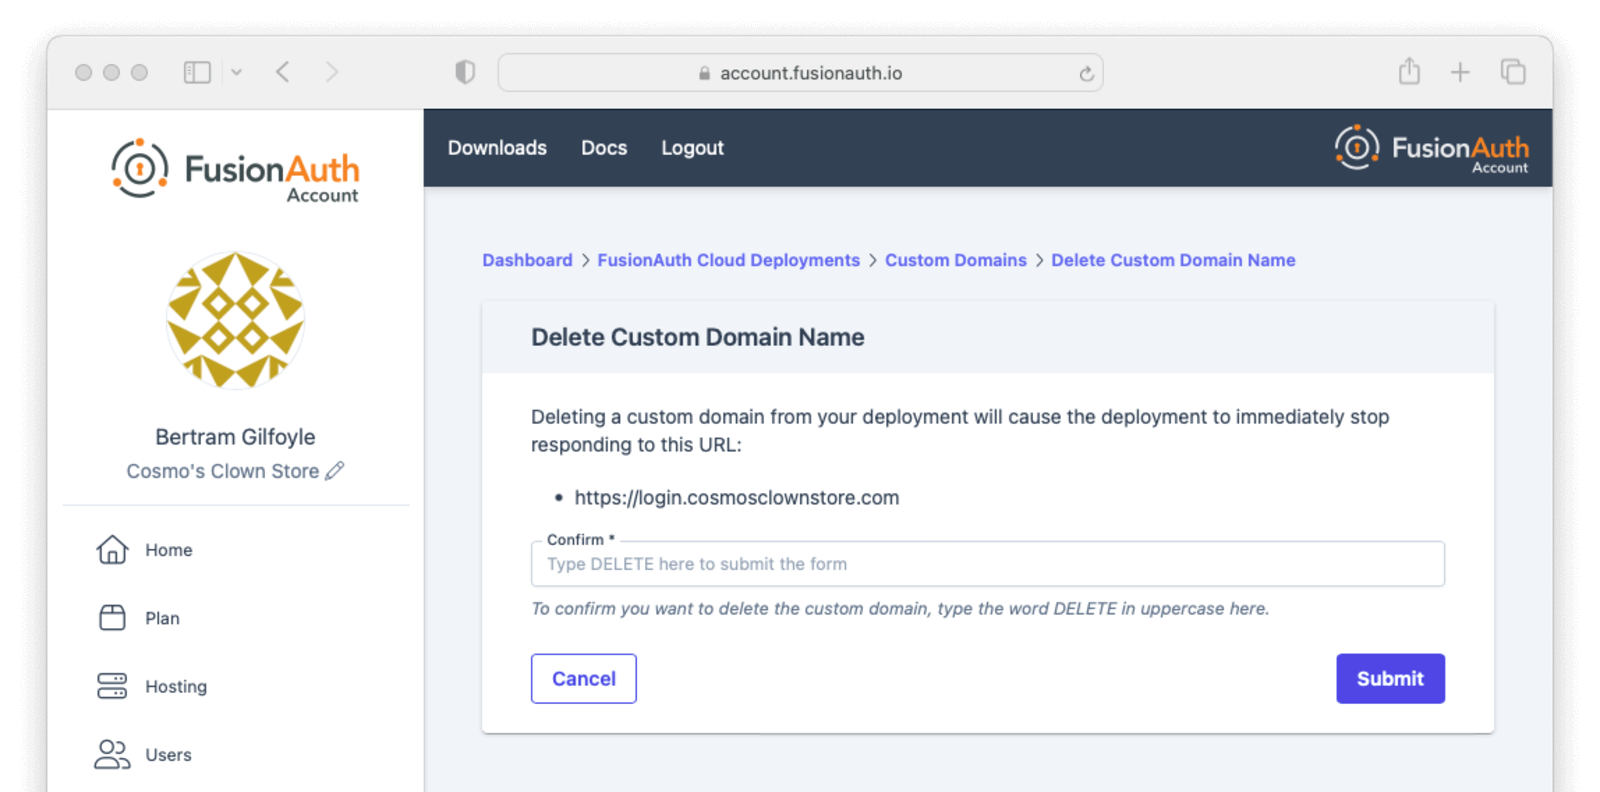 Form to delete a custom domain.